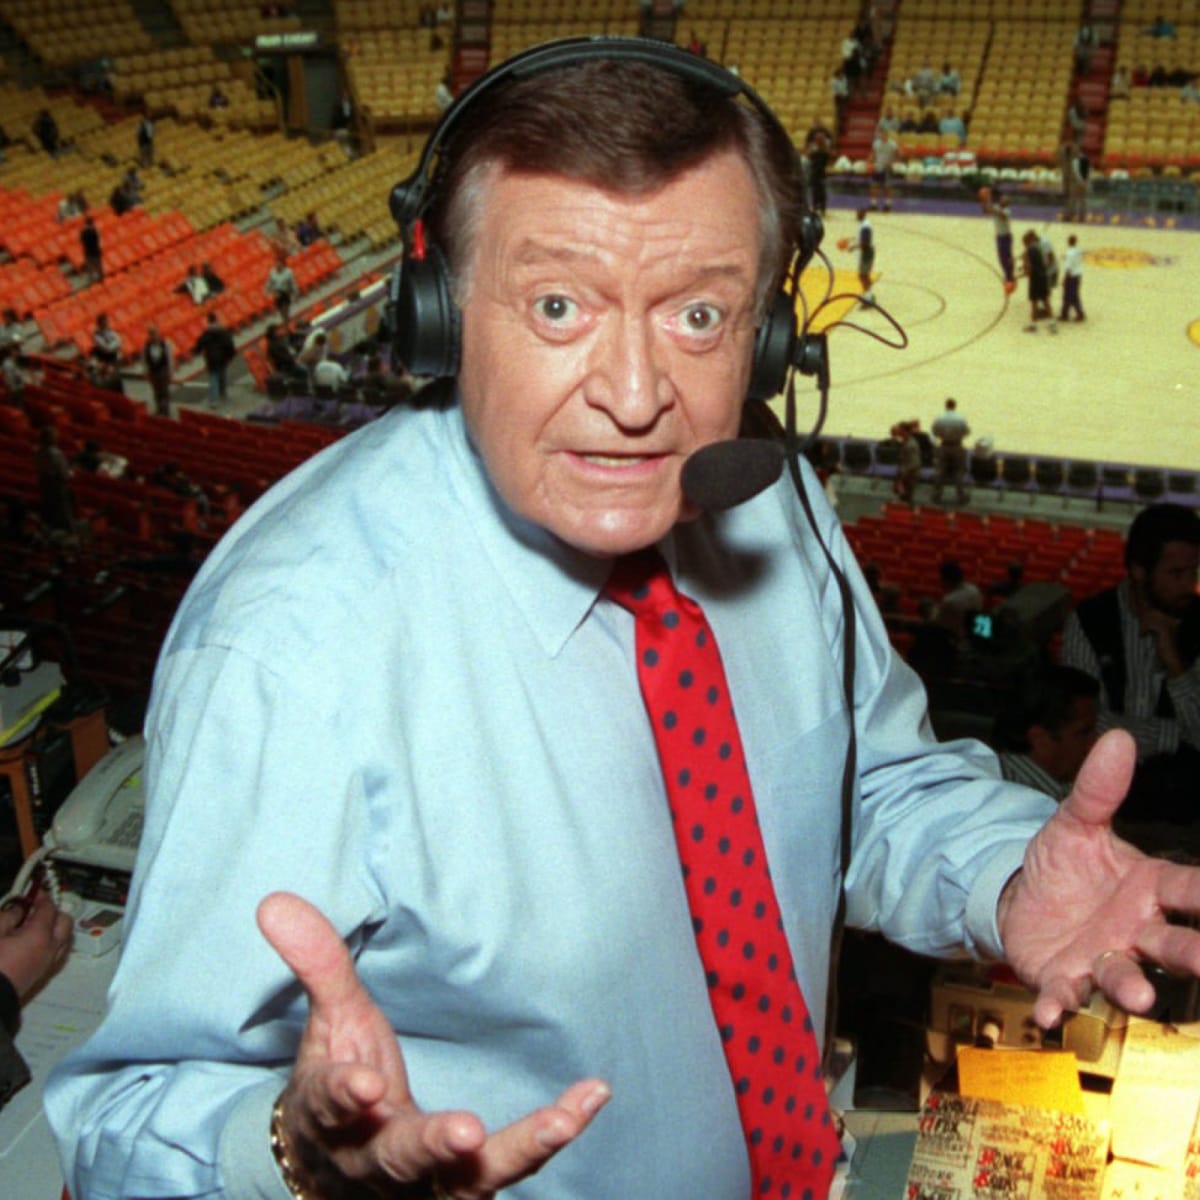 The ASA Remembers Chick Hearn